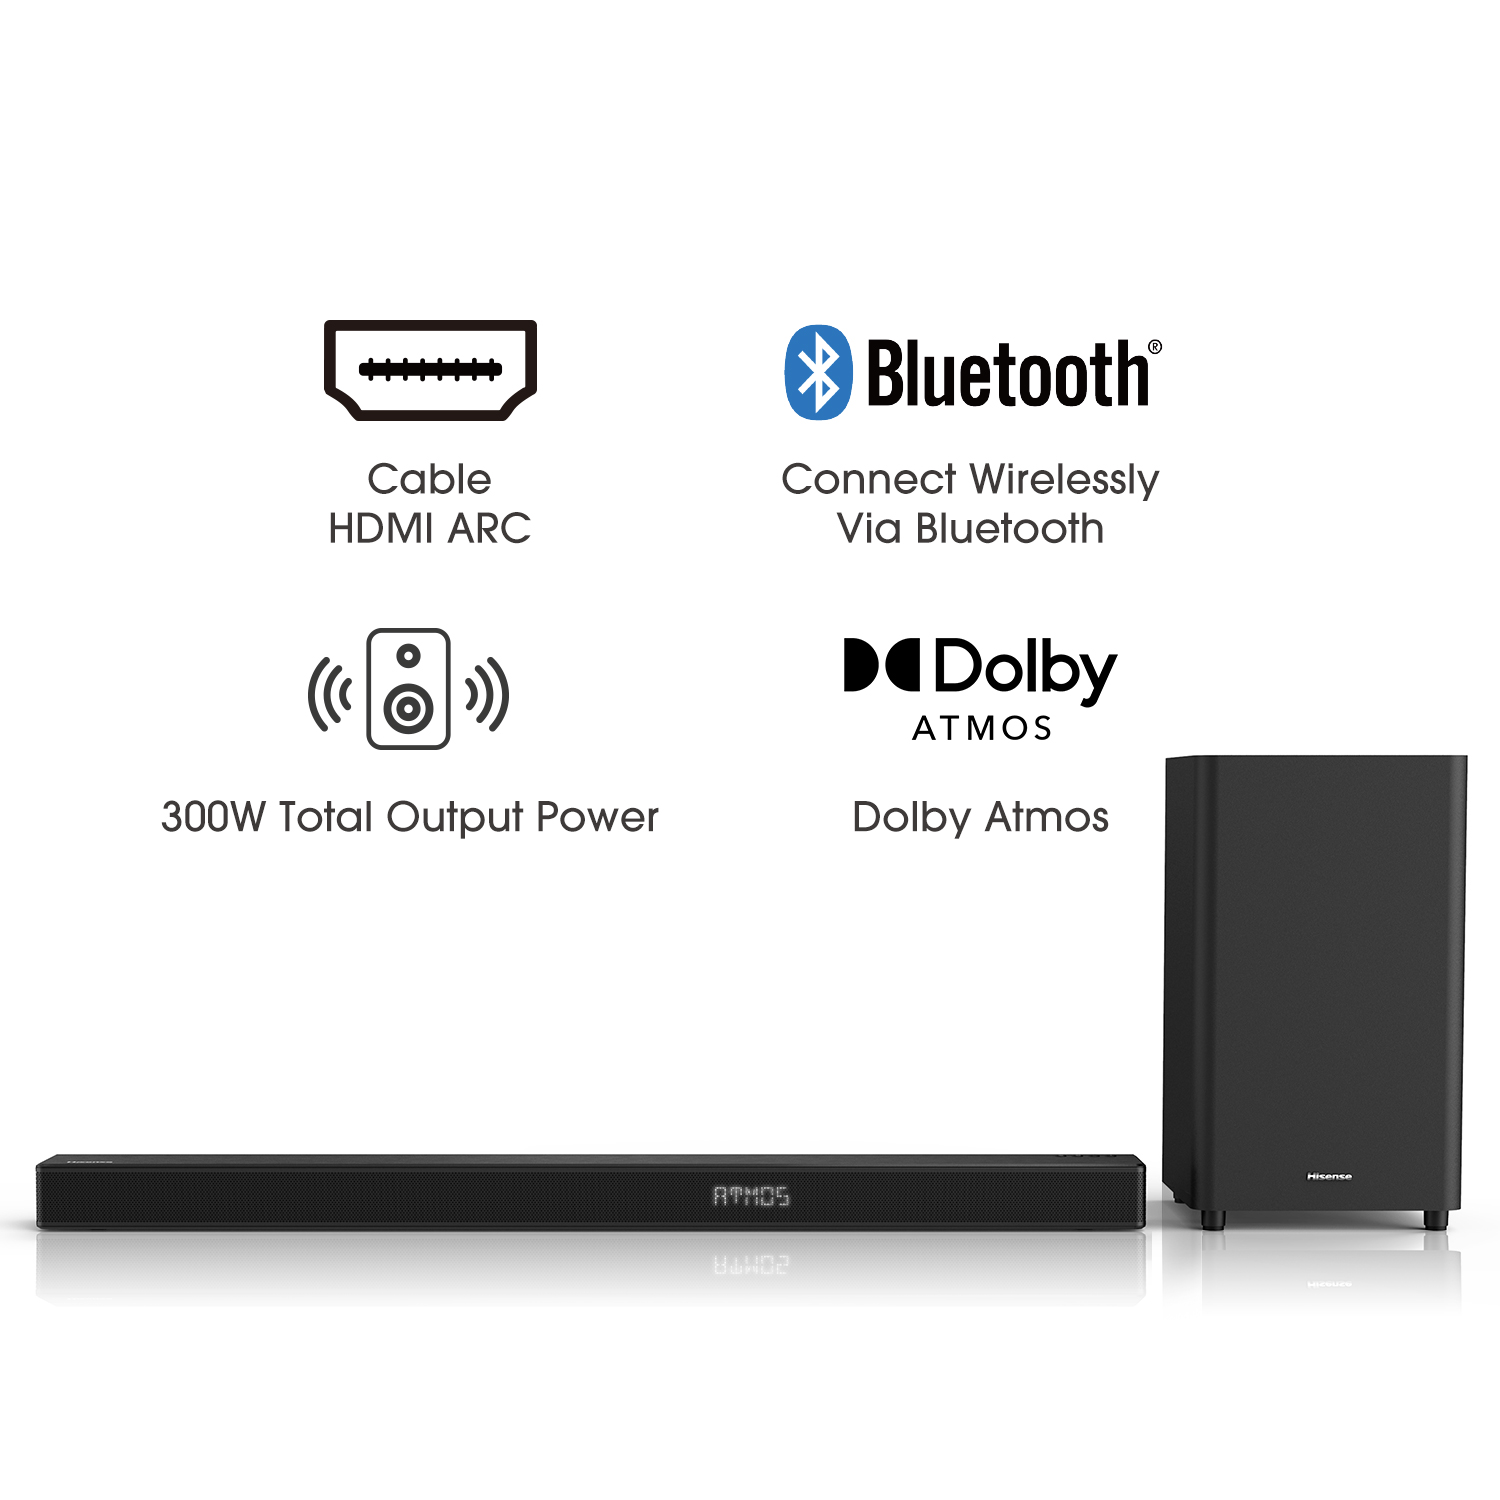 Hisense HS312 3.1ch Sound Bar with Wireless Subwoofer, 300W, Dolby Atmos, 4K Pass-Through, Cinematic Experience, One Remote Contorl, Bluetooth, HDMI ARC/Optical/AUX/USB (Model HS312) Black - image 2 of 22